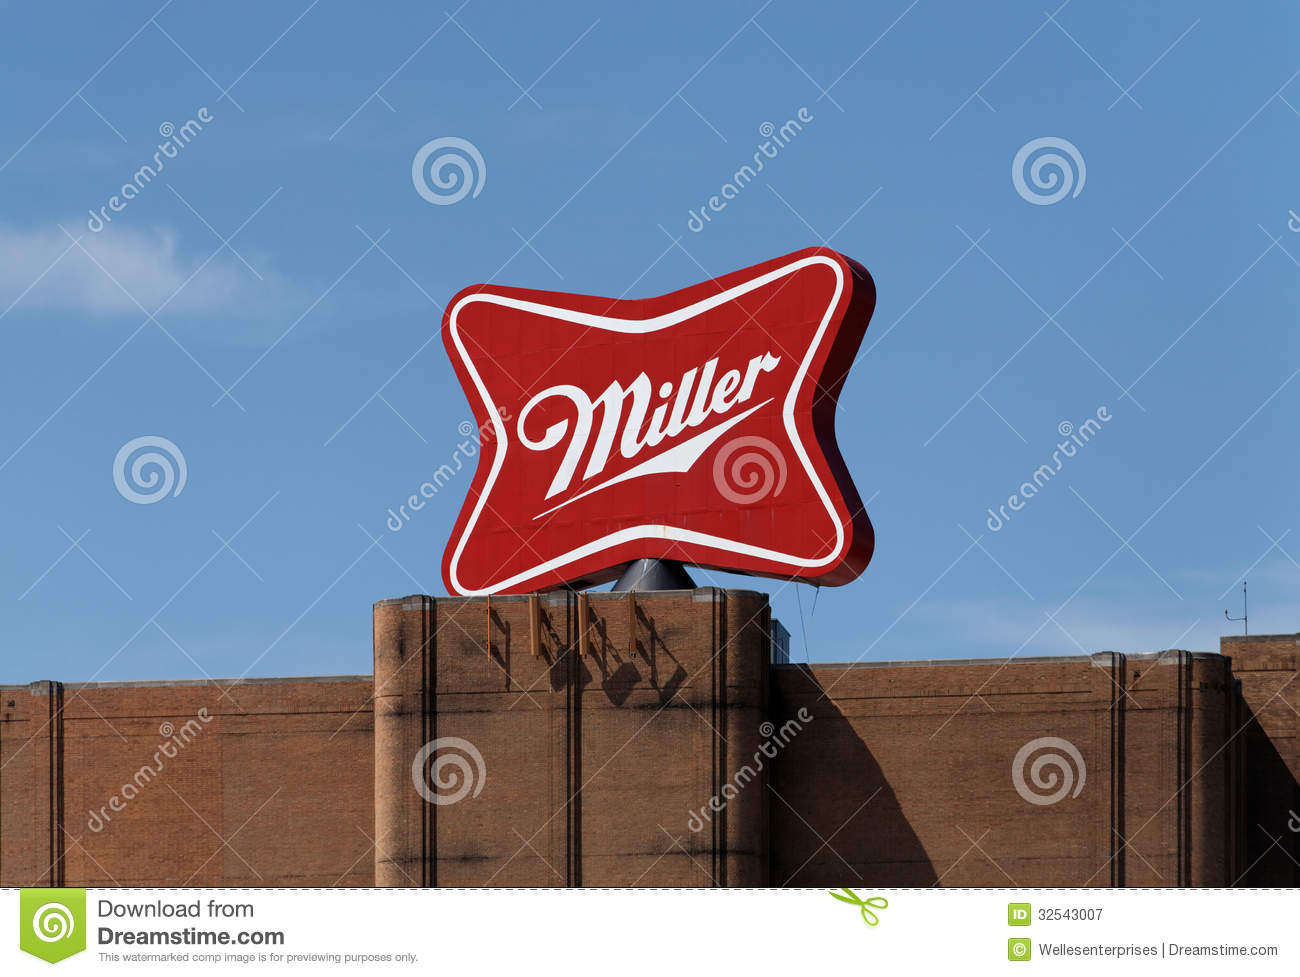 Brewery Complex In Milwaukee Wisconsin  The Miller Brewing Company Is